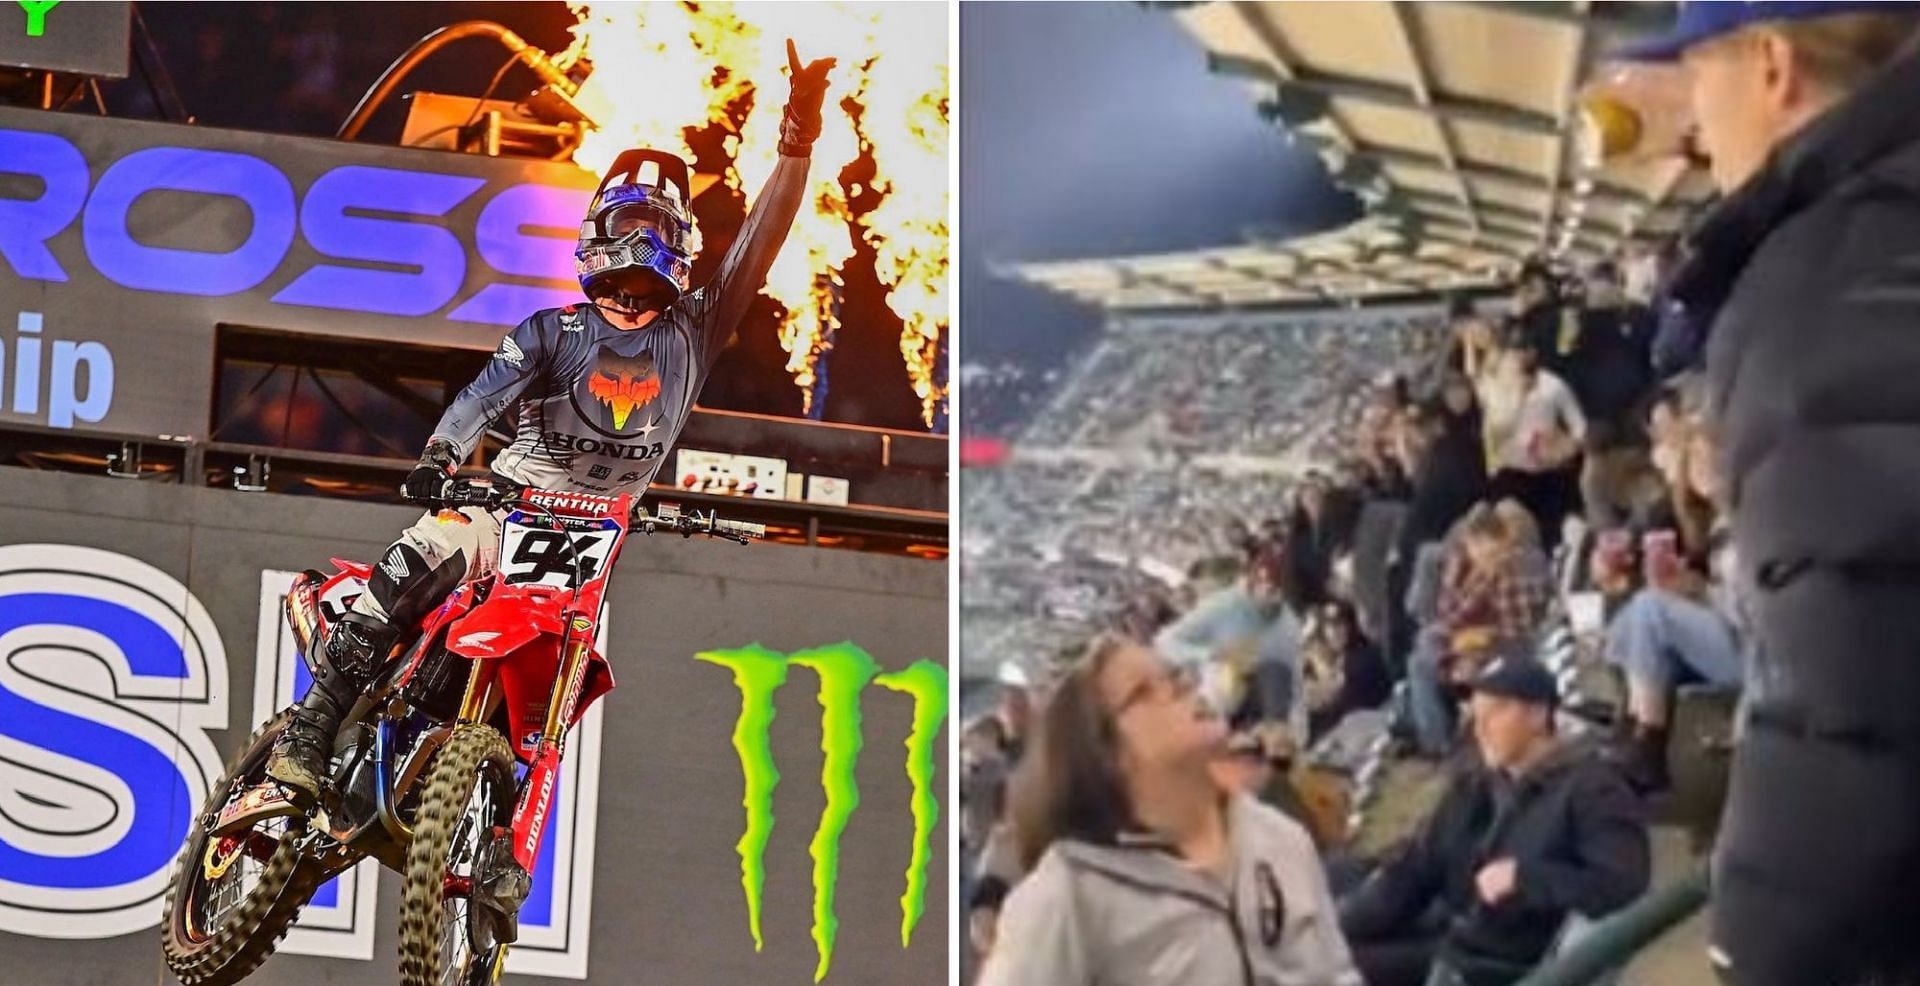 A fight broke out at a Supercross event in Anaheim (Image via Supercross Live/Twitter and Keemstar/Twitter)